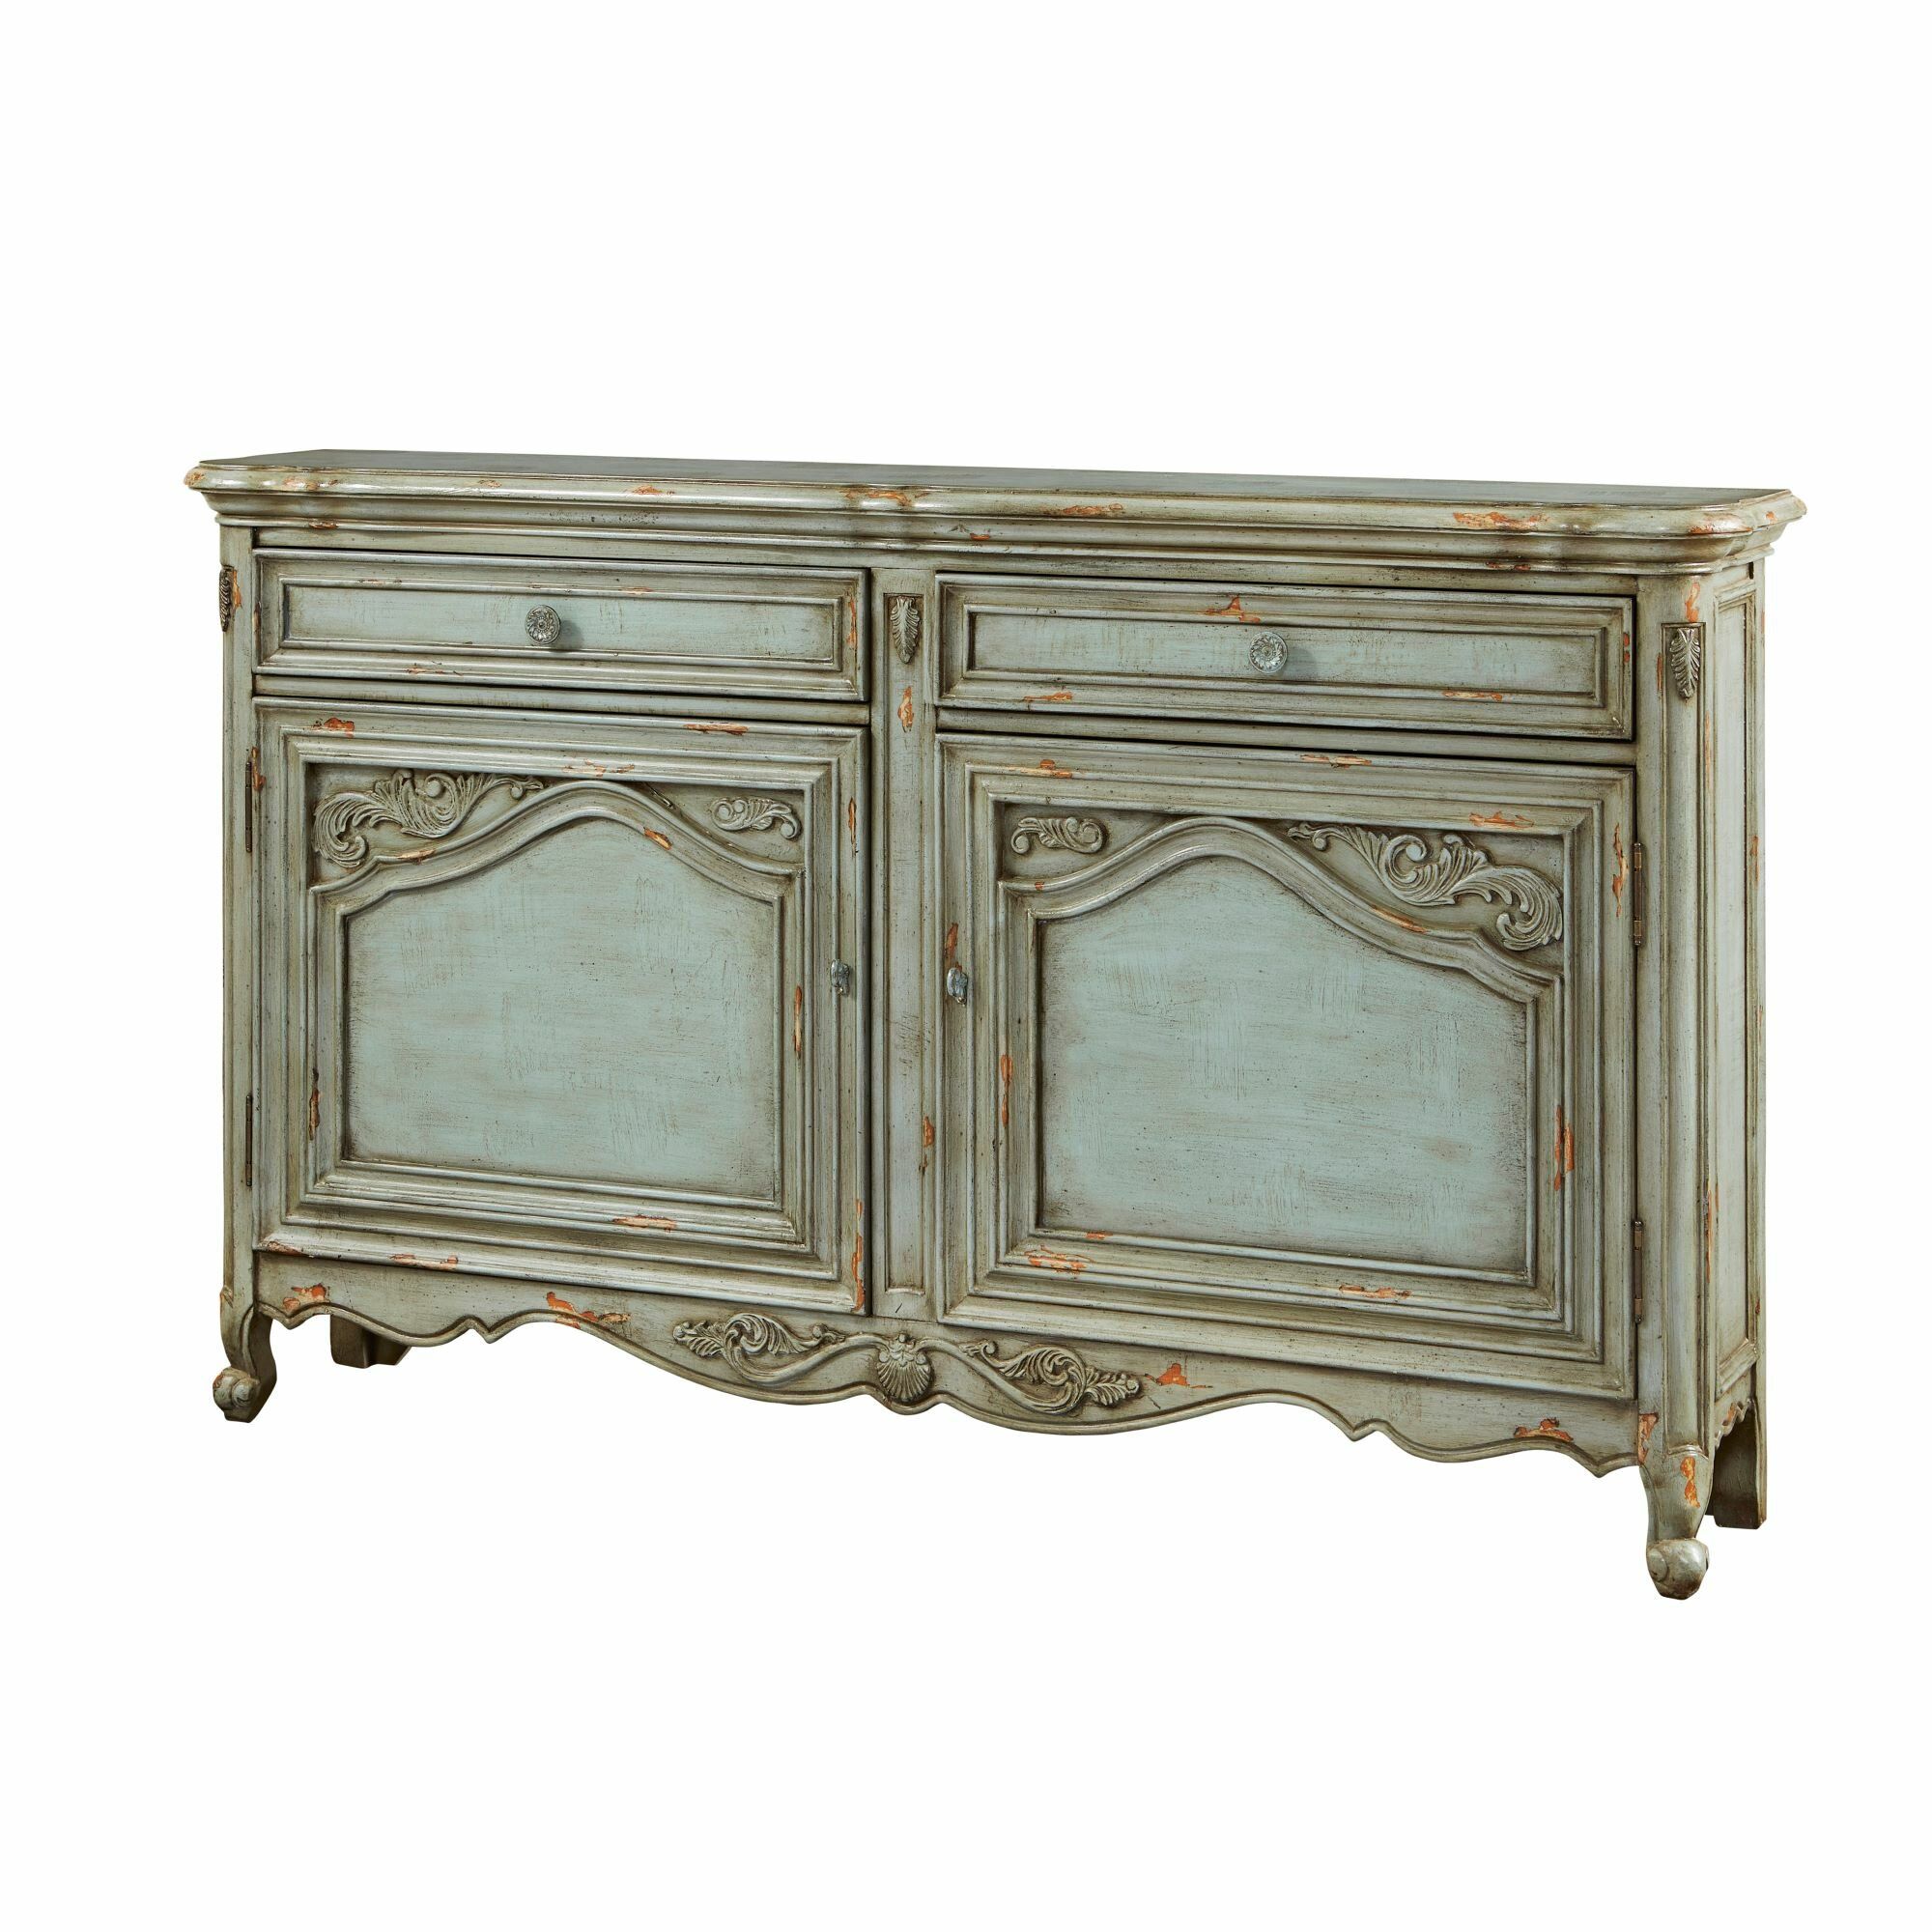 Farmhouse & Rustic Distressed Finish Sideboards & Buffets With Regard To Current Chicoree Charlena Sideboards (View 6 of 20)